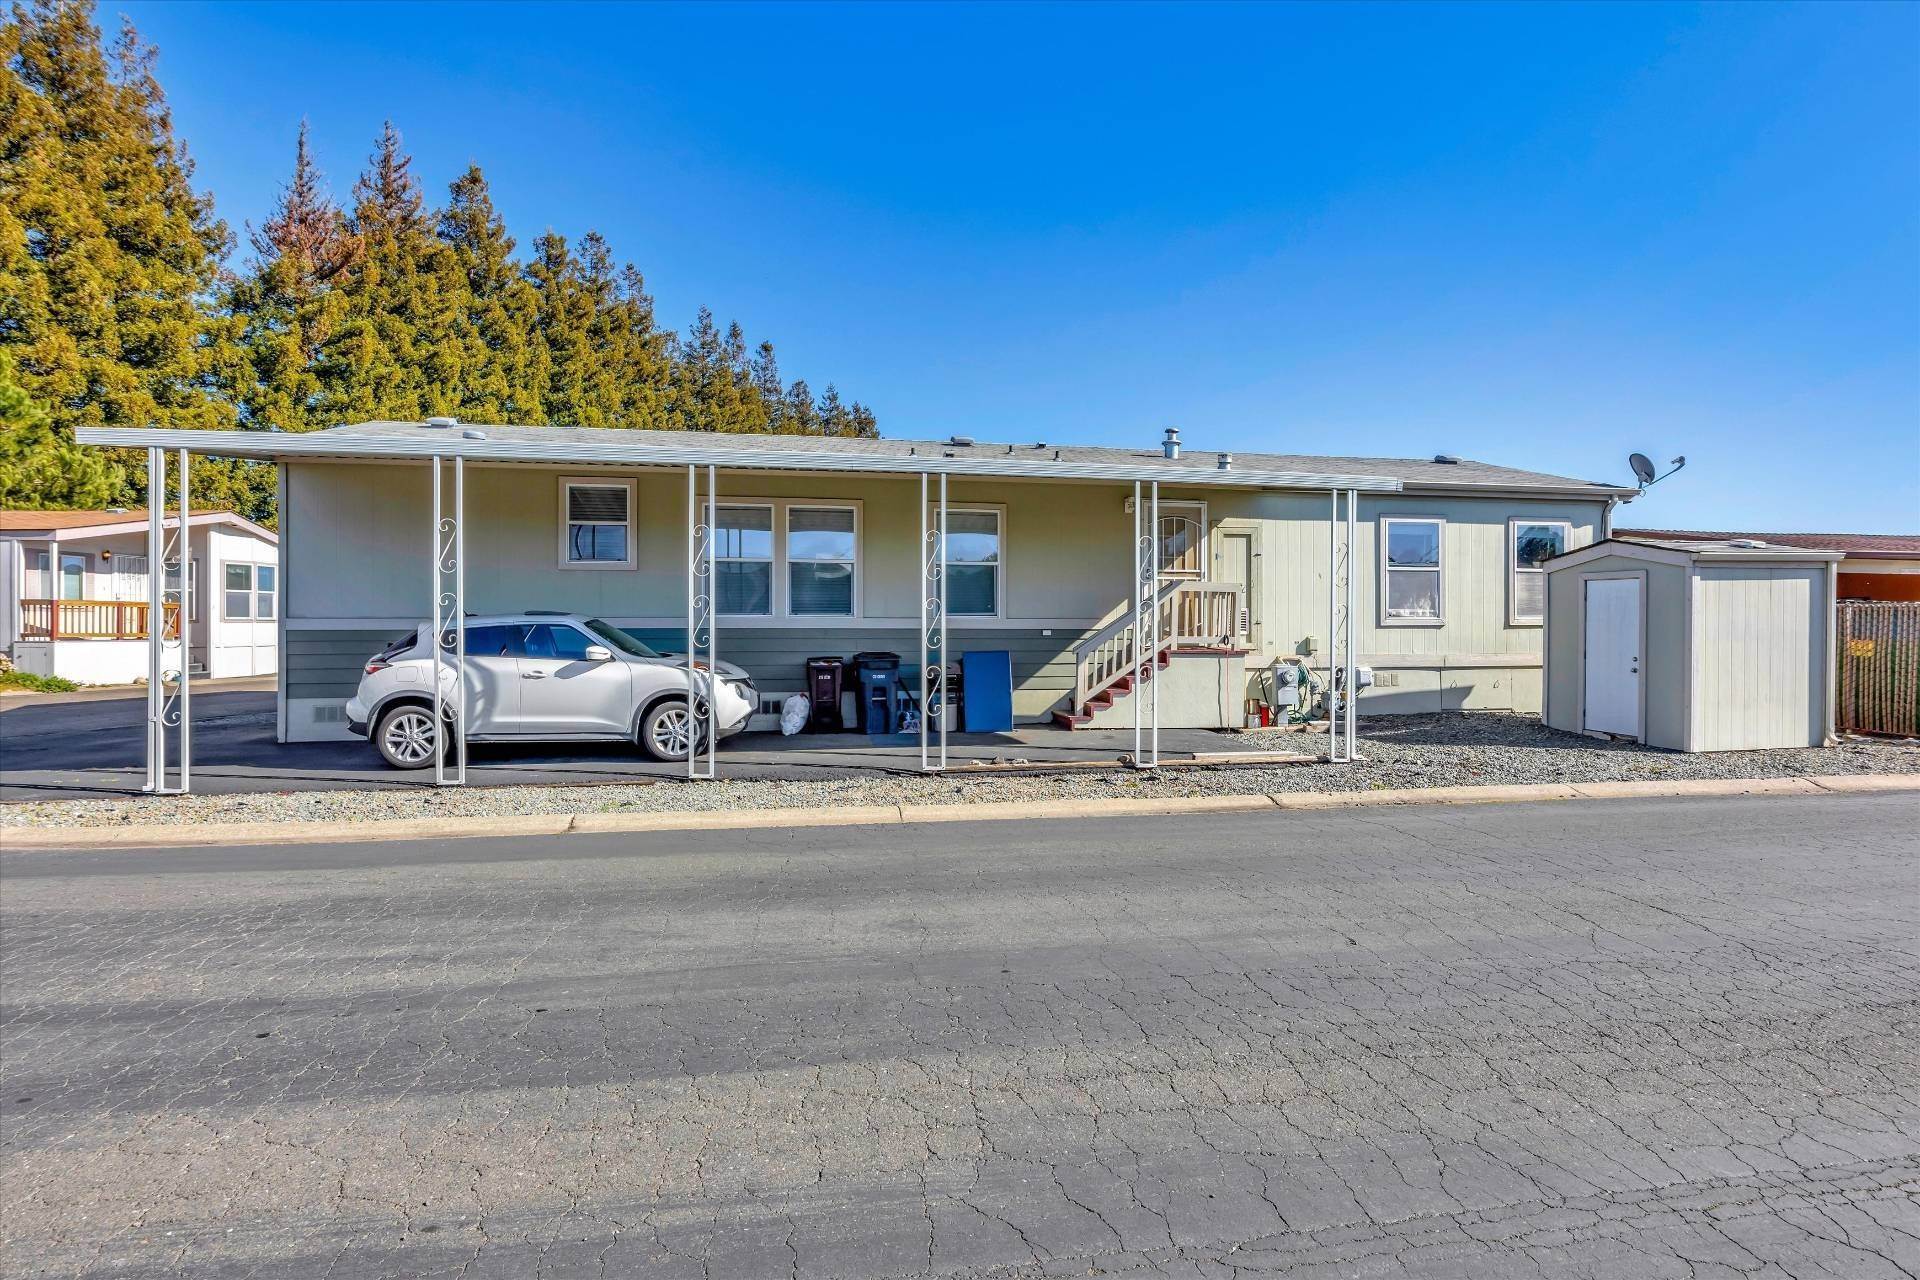 27. Mobile Home for Sale at Hayward, CA 94545